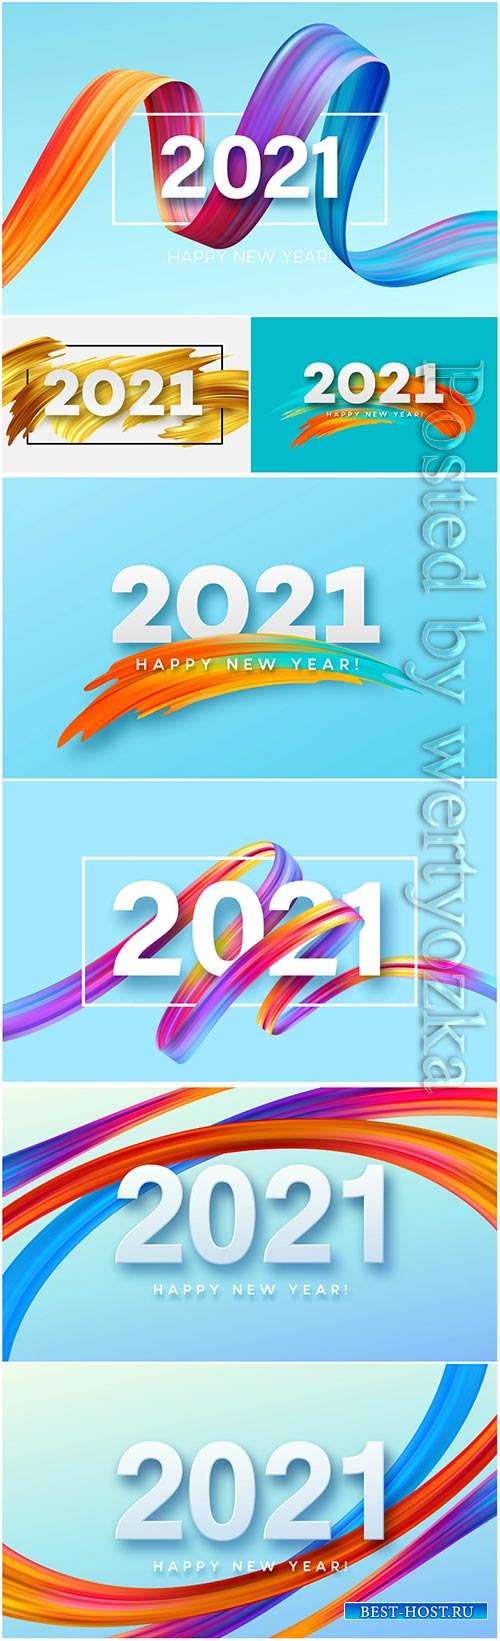 2021 happy new year color flow background